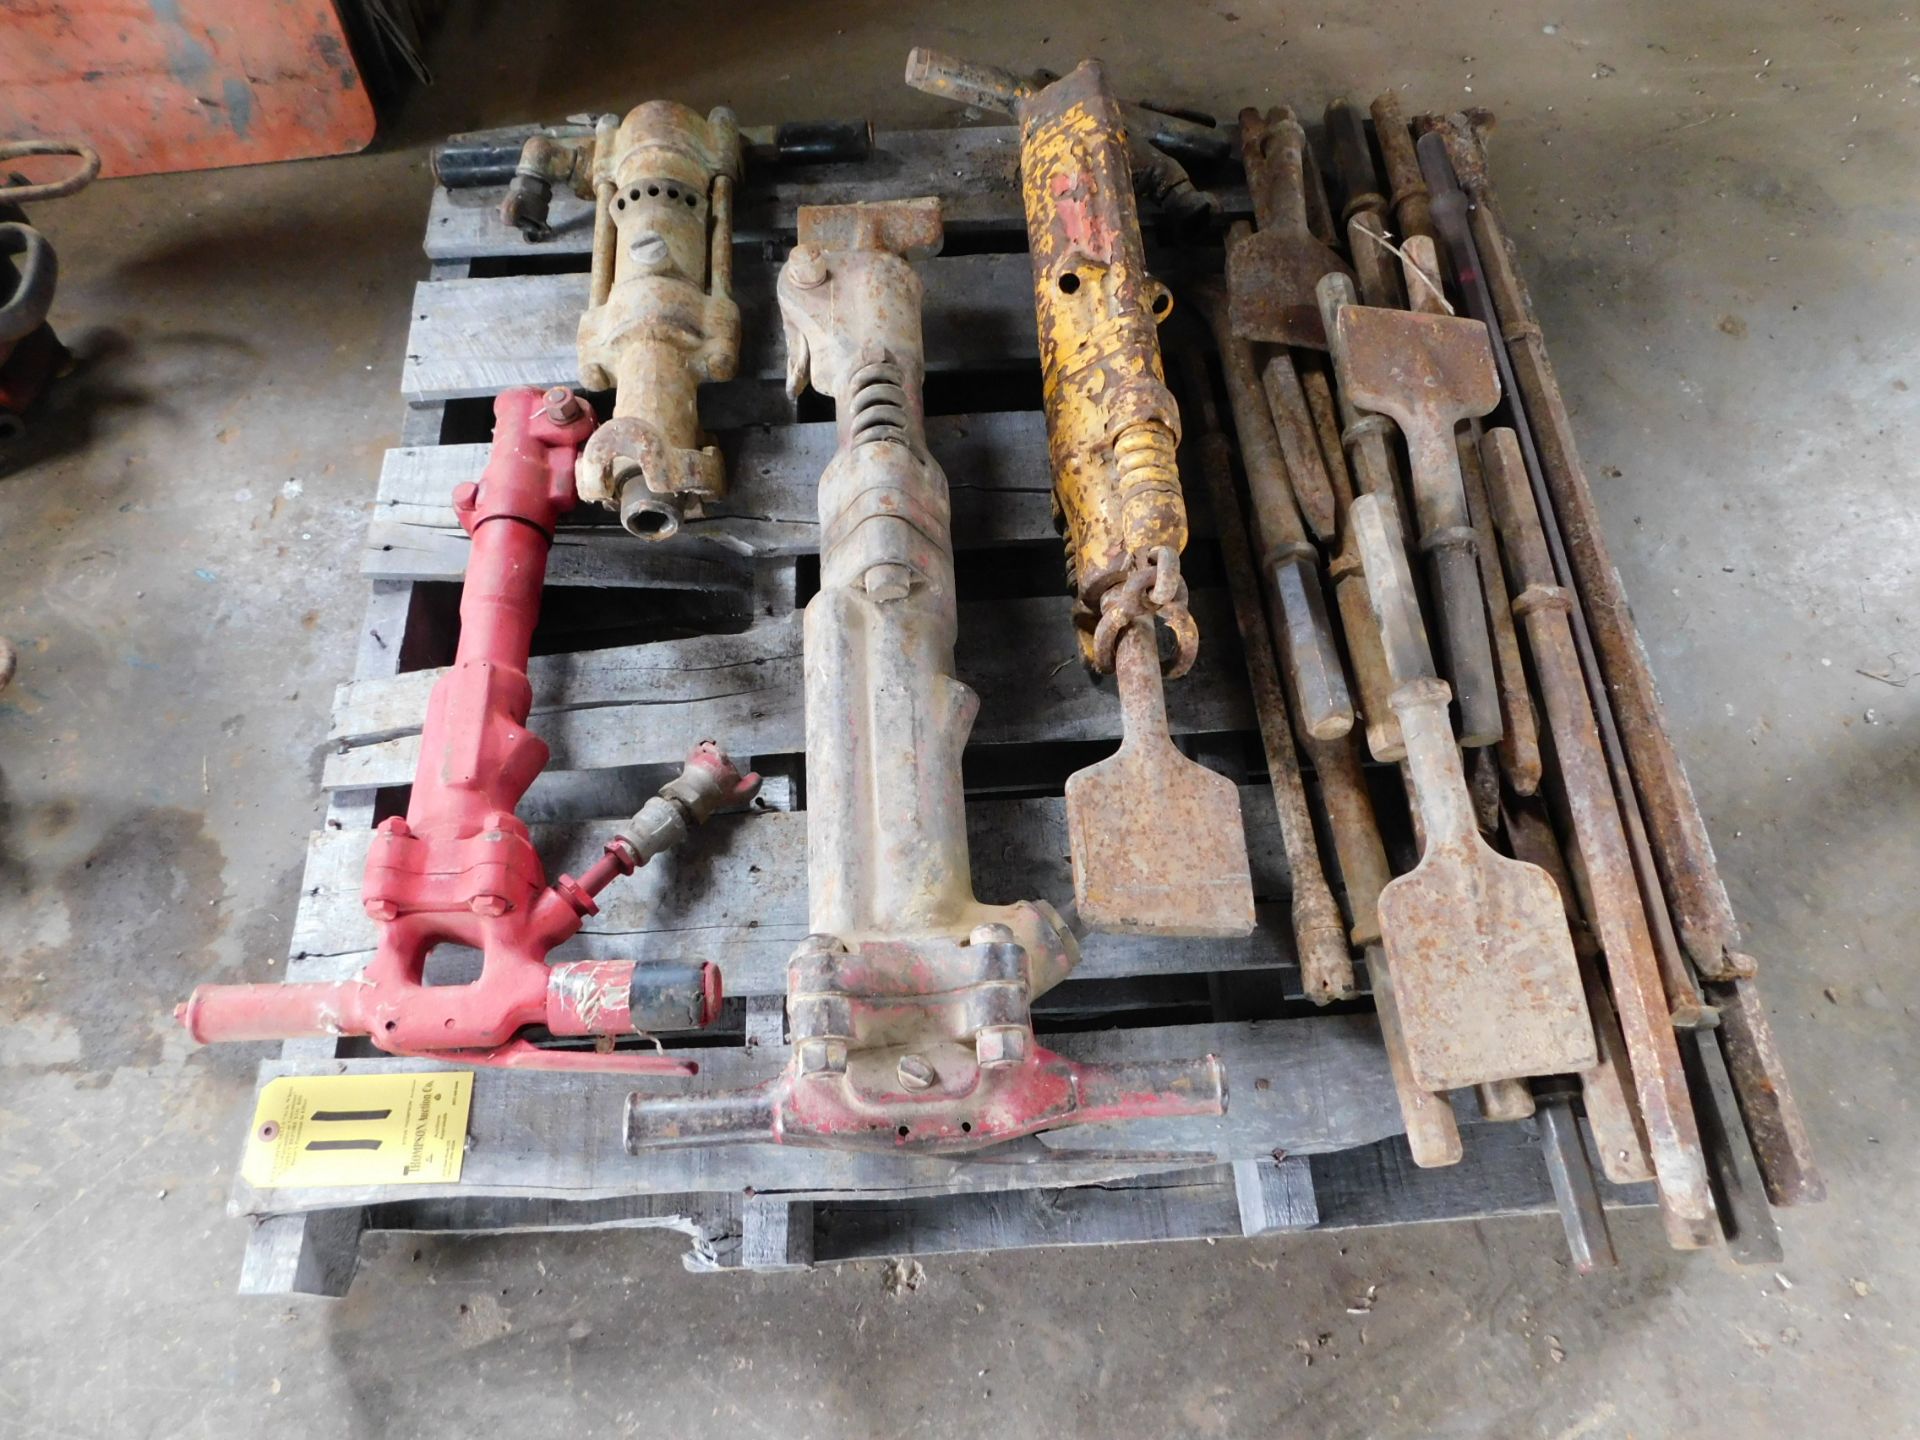 (4) Pneumatic Jackhammers with Bits